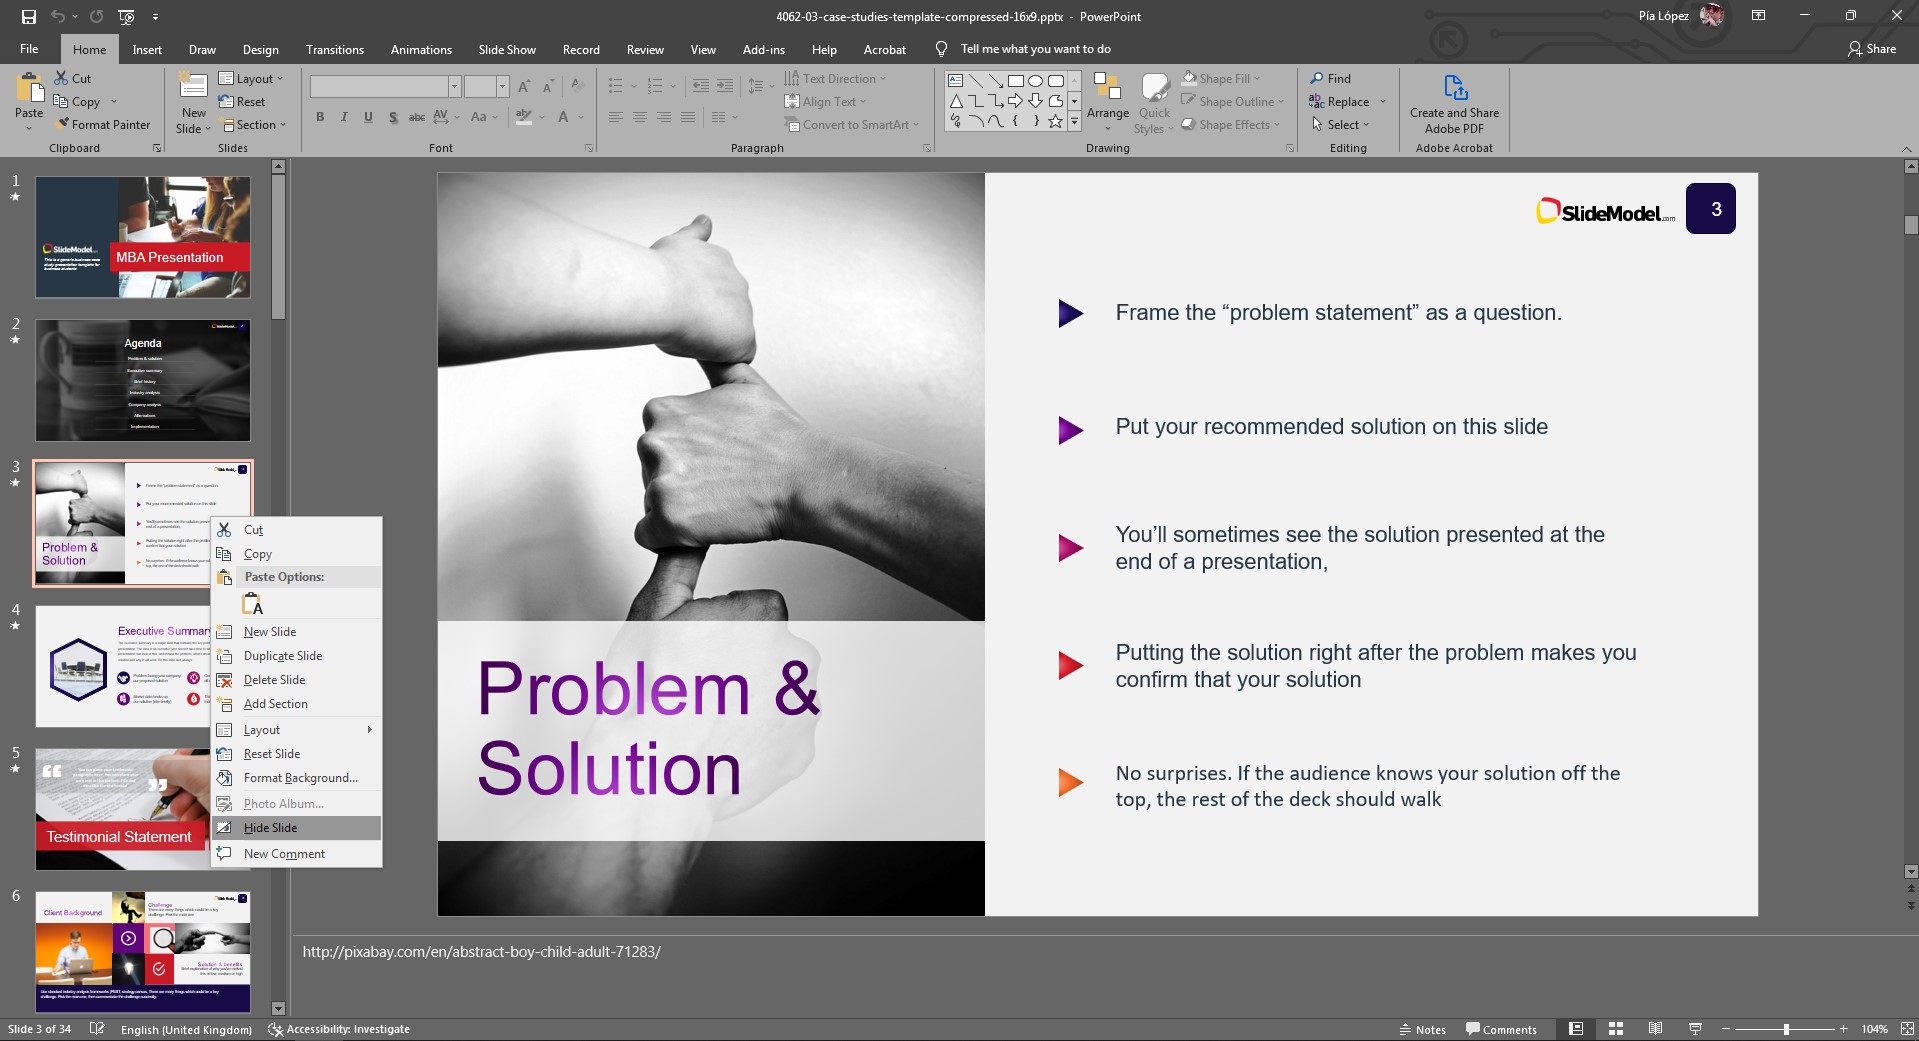 how to hide a slide in PowerPoint via right-click